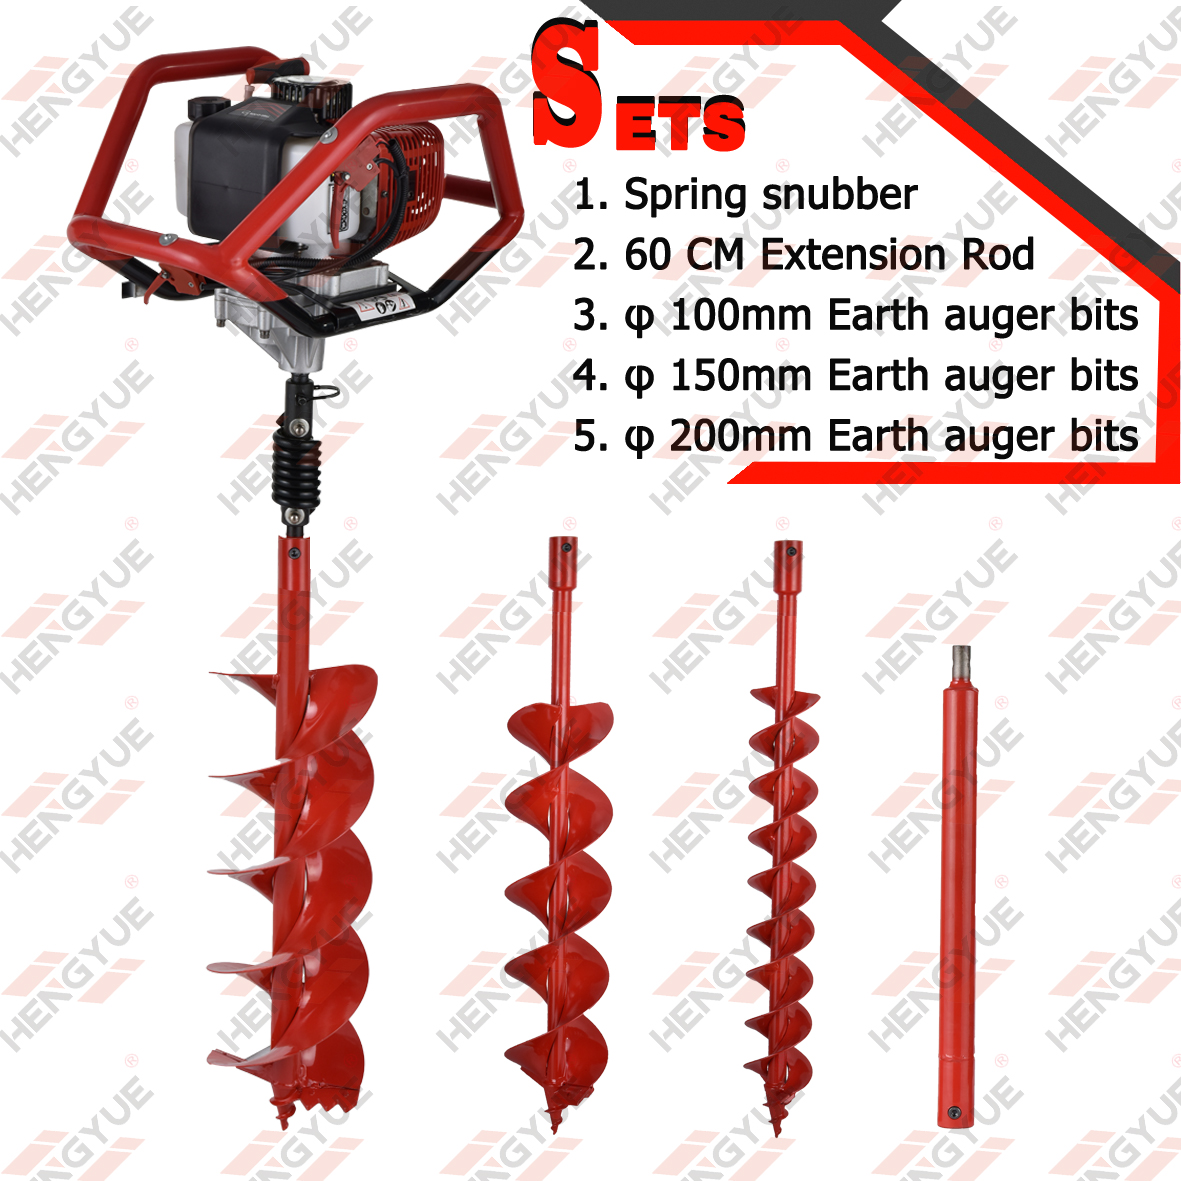 43cc 1 Or 2 Man Operate Earth Auger 